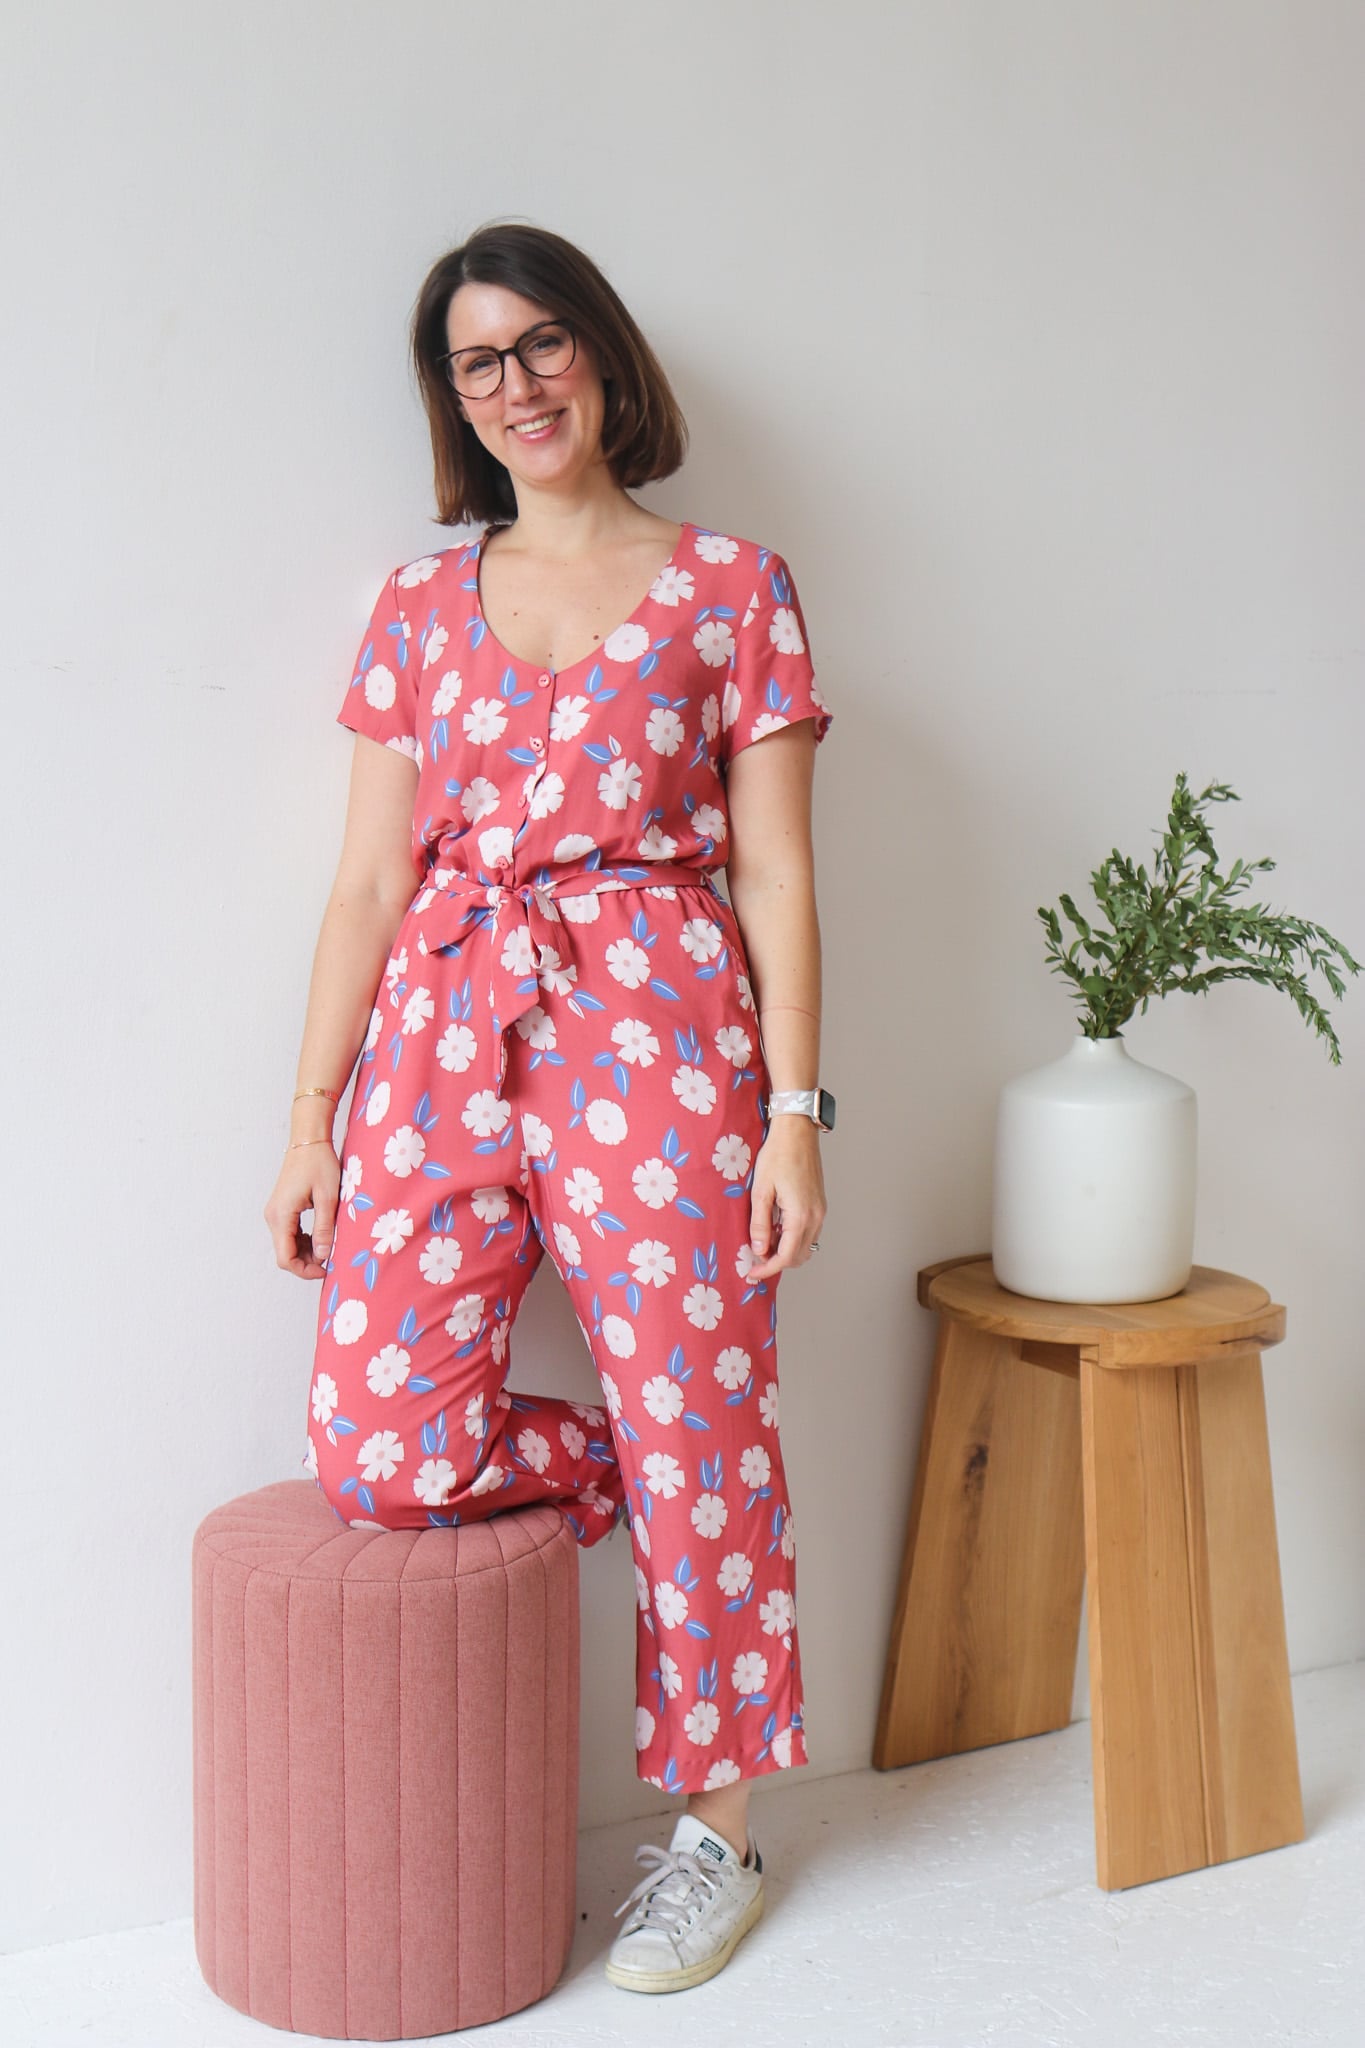 Lise Tailor - Janie Jumpsuit Sewing Pattern